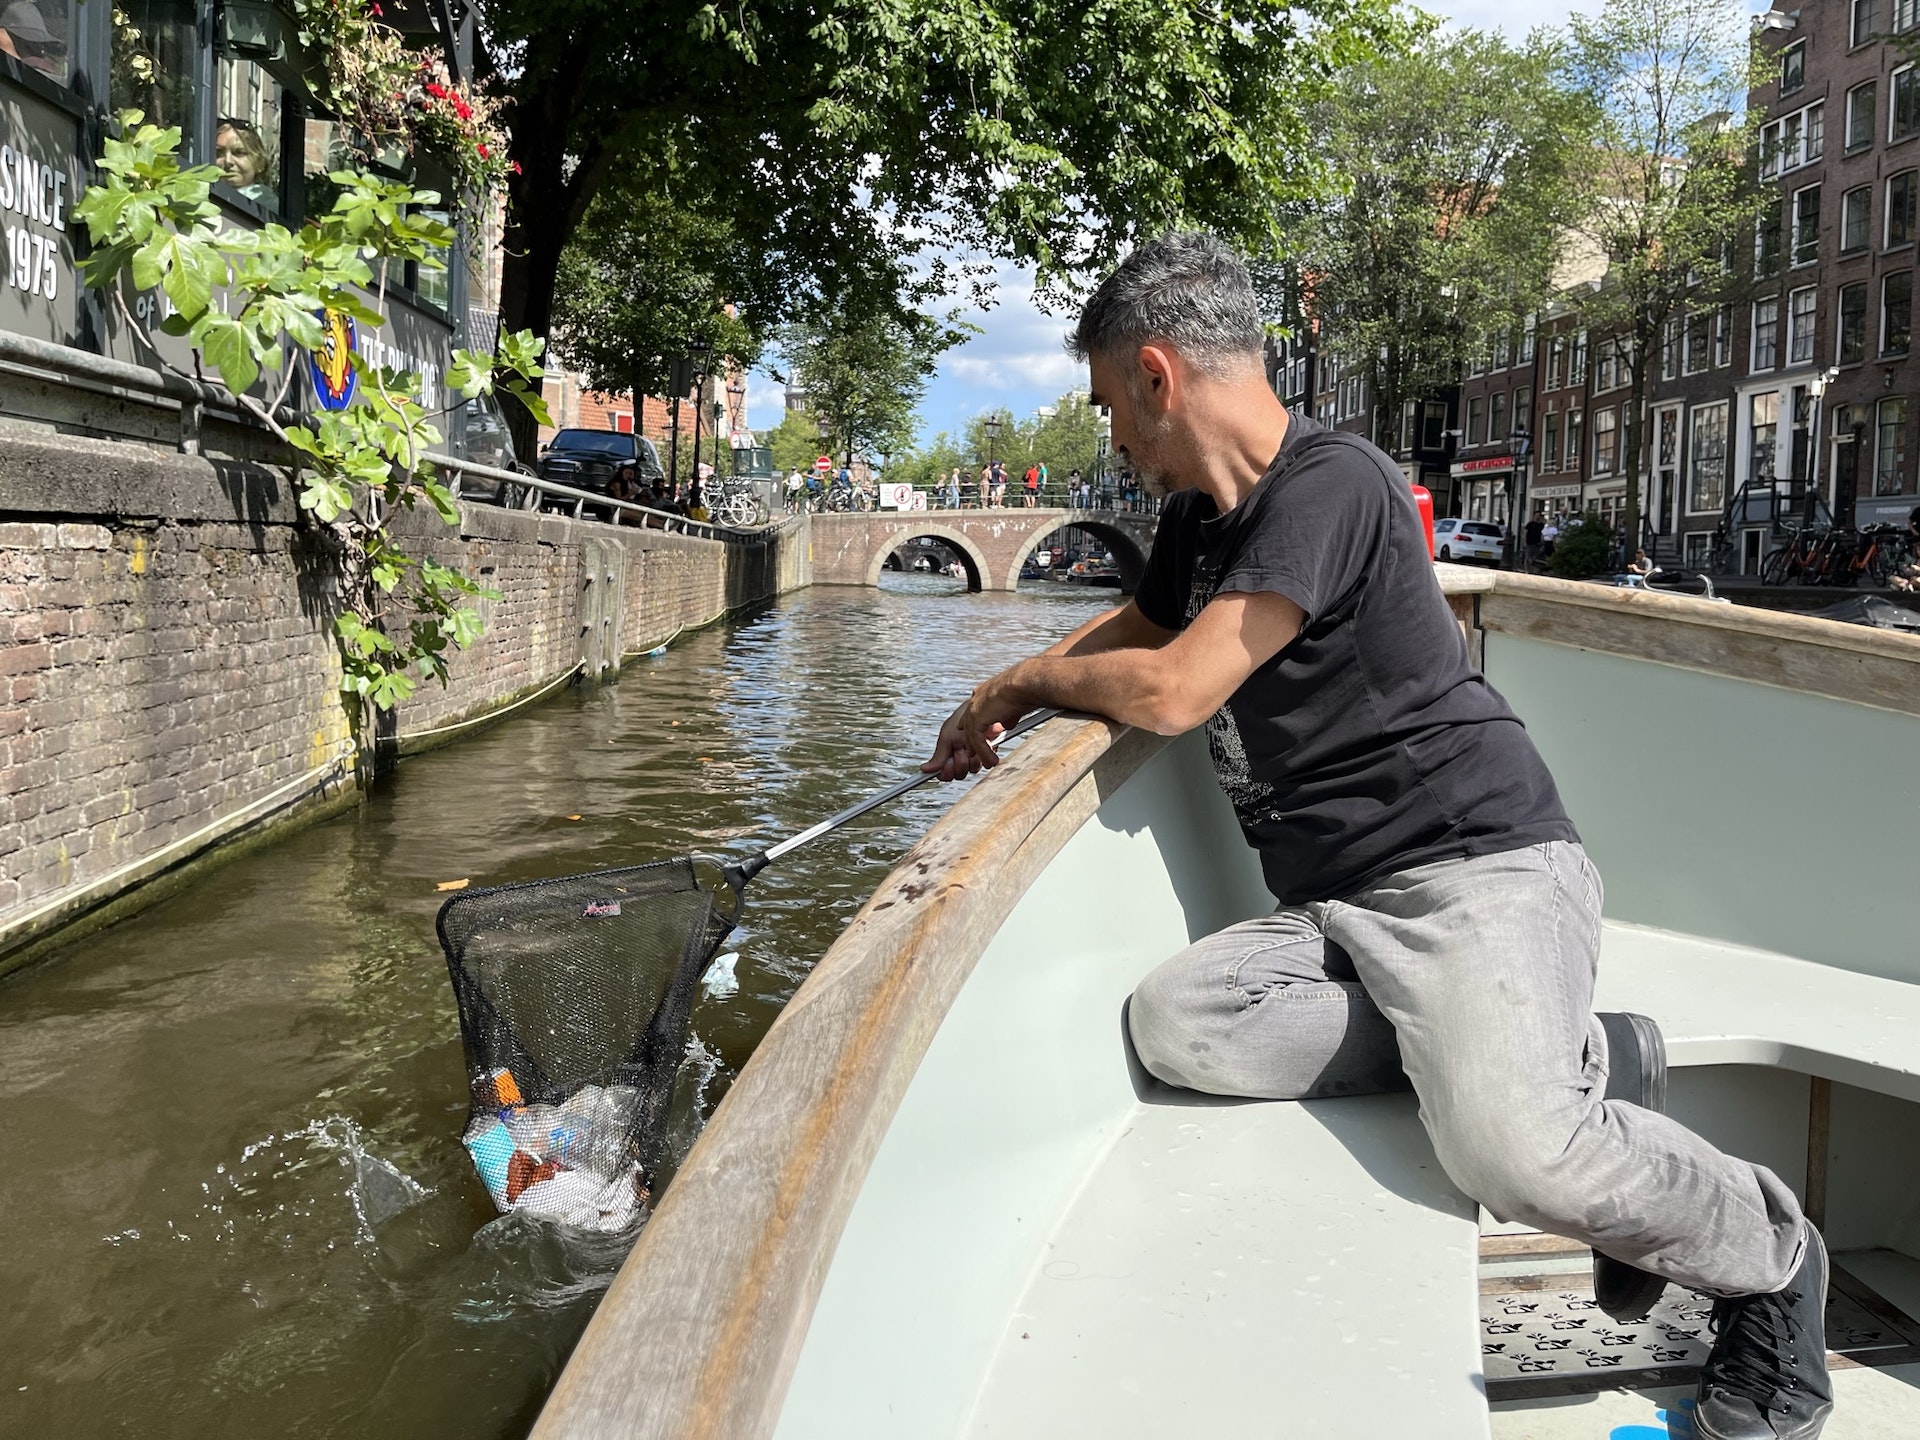 A man leans over the edge of a fishing boat to grab trash from the canal with his net